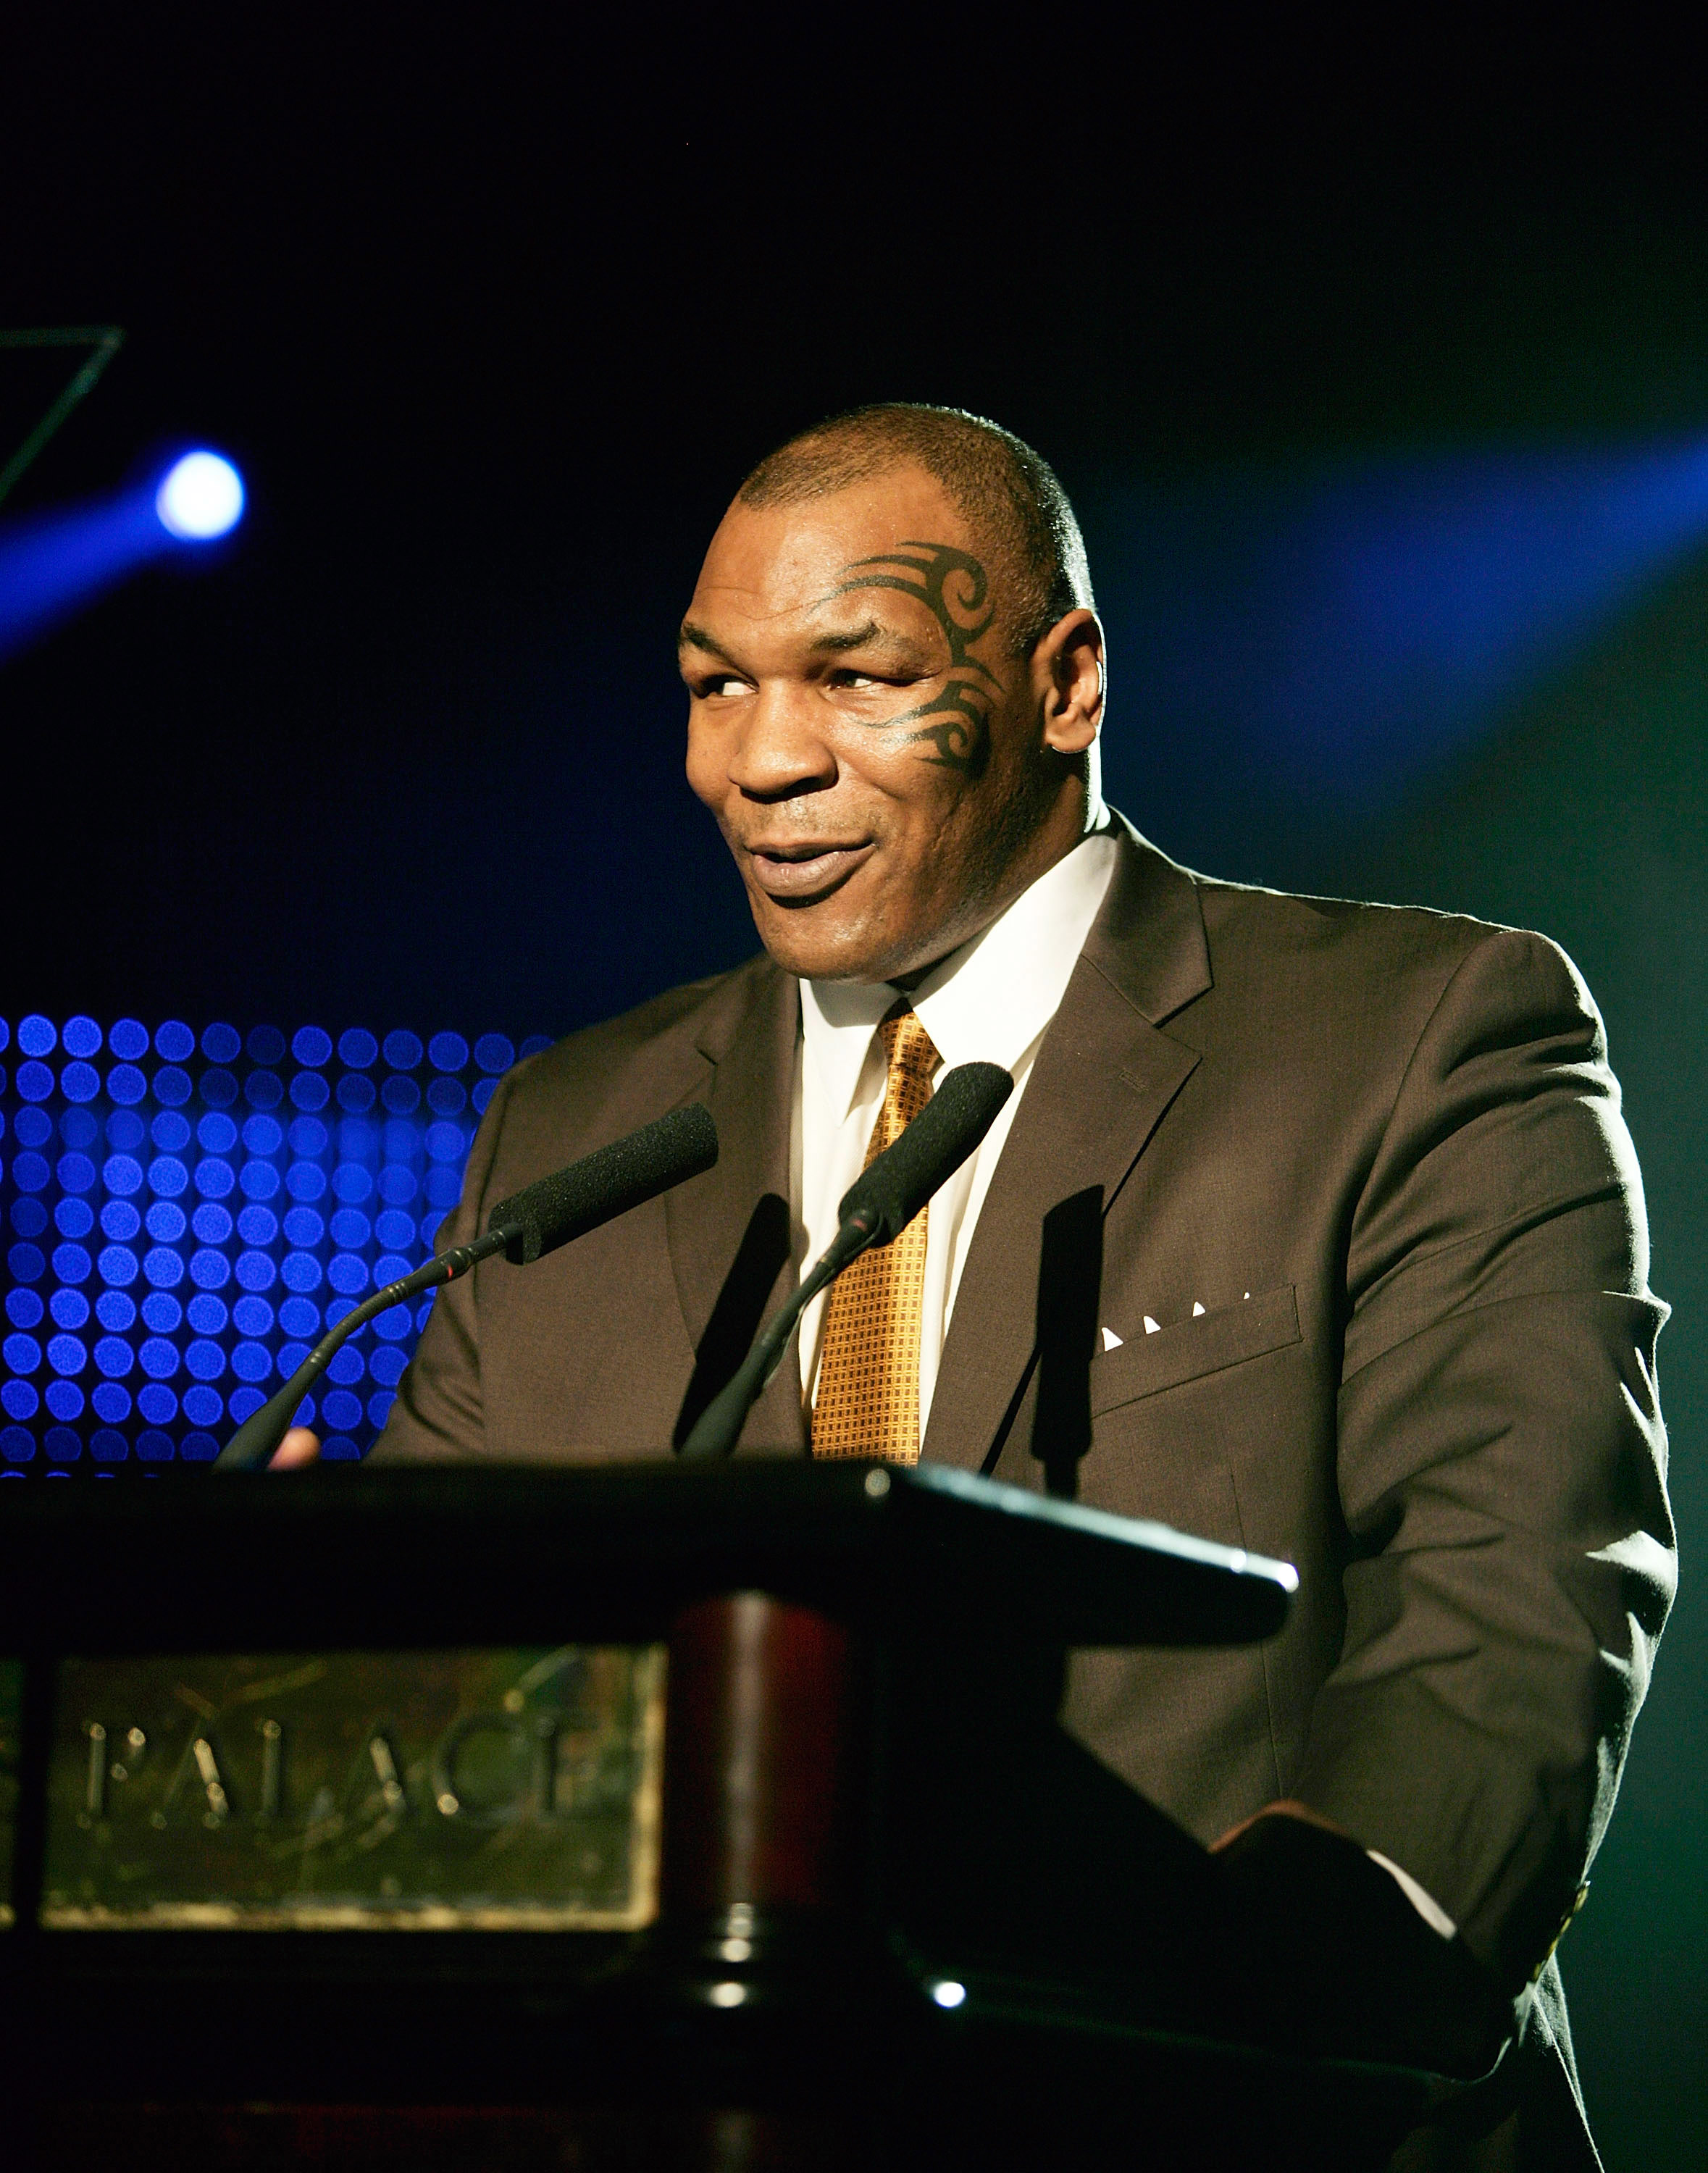 Mike Tyson delivering a speech at the Mike Tyson Charity Banquet held at the Emperors Palace on January 30, 2008, in Johannesburg, South Africa | Source: Getty Images